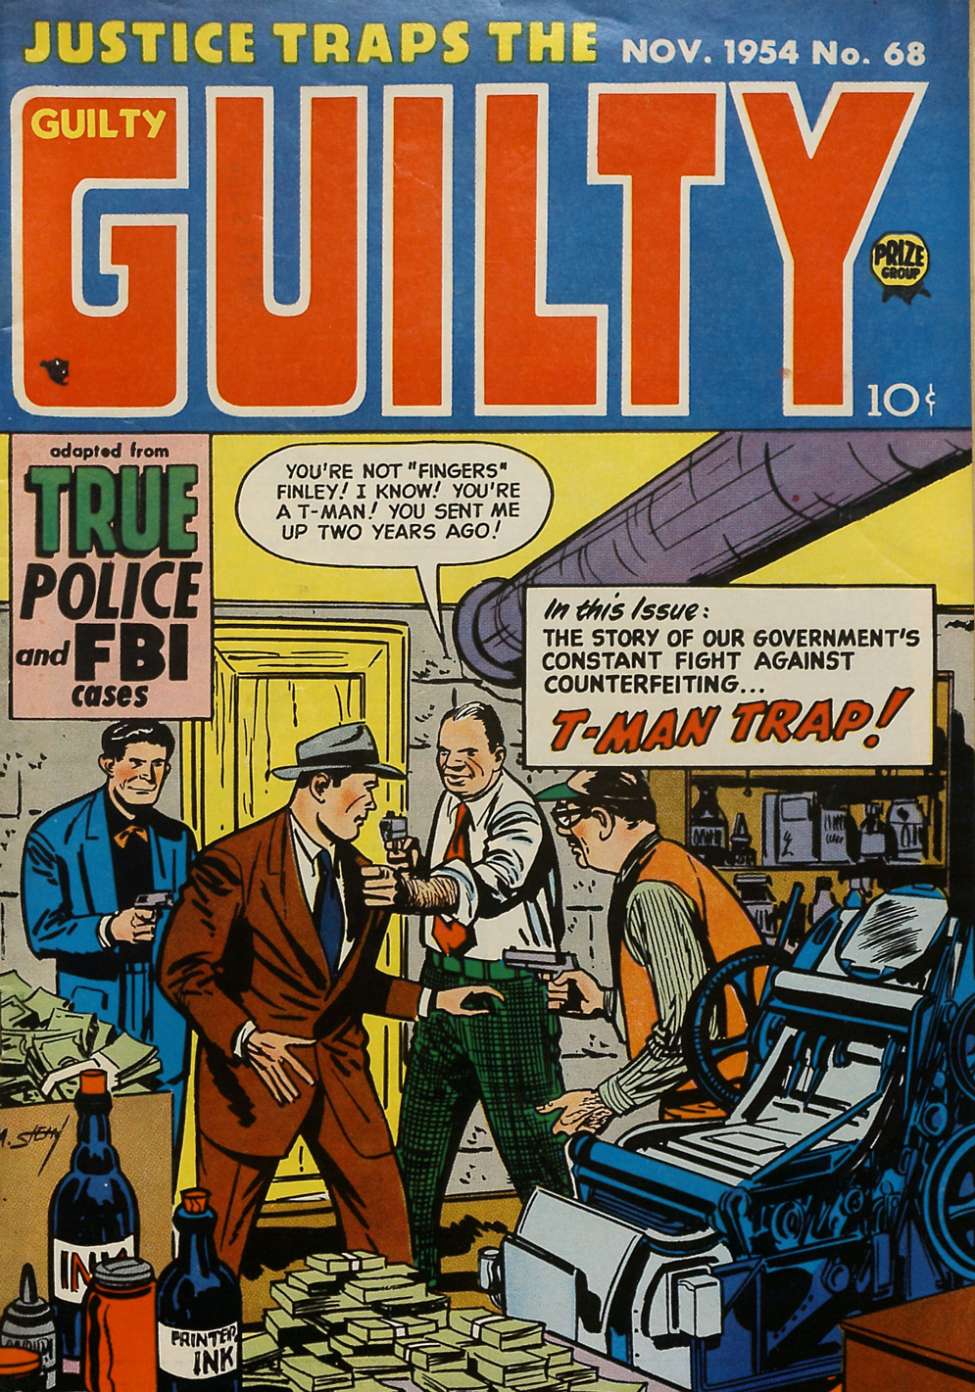 Comic Book Cover For Justice Traps the Guilty 68 (alt)